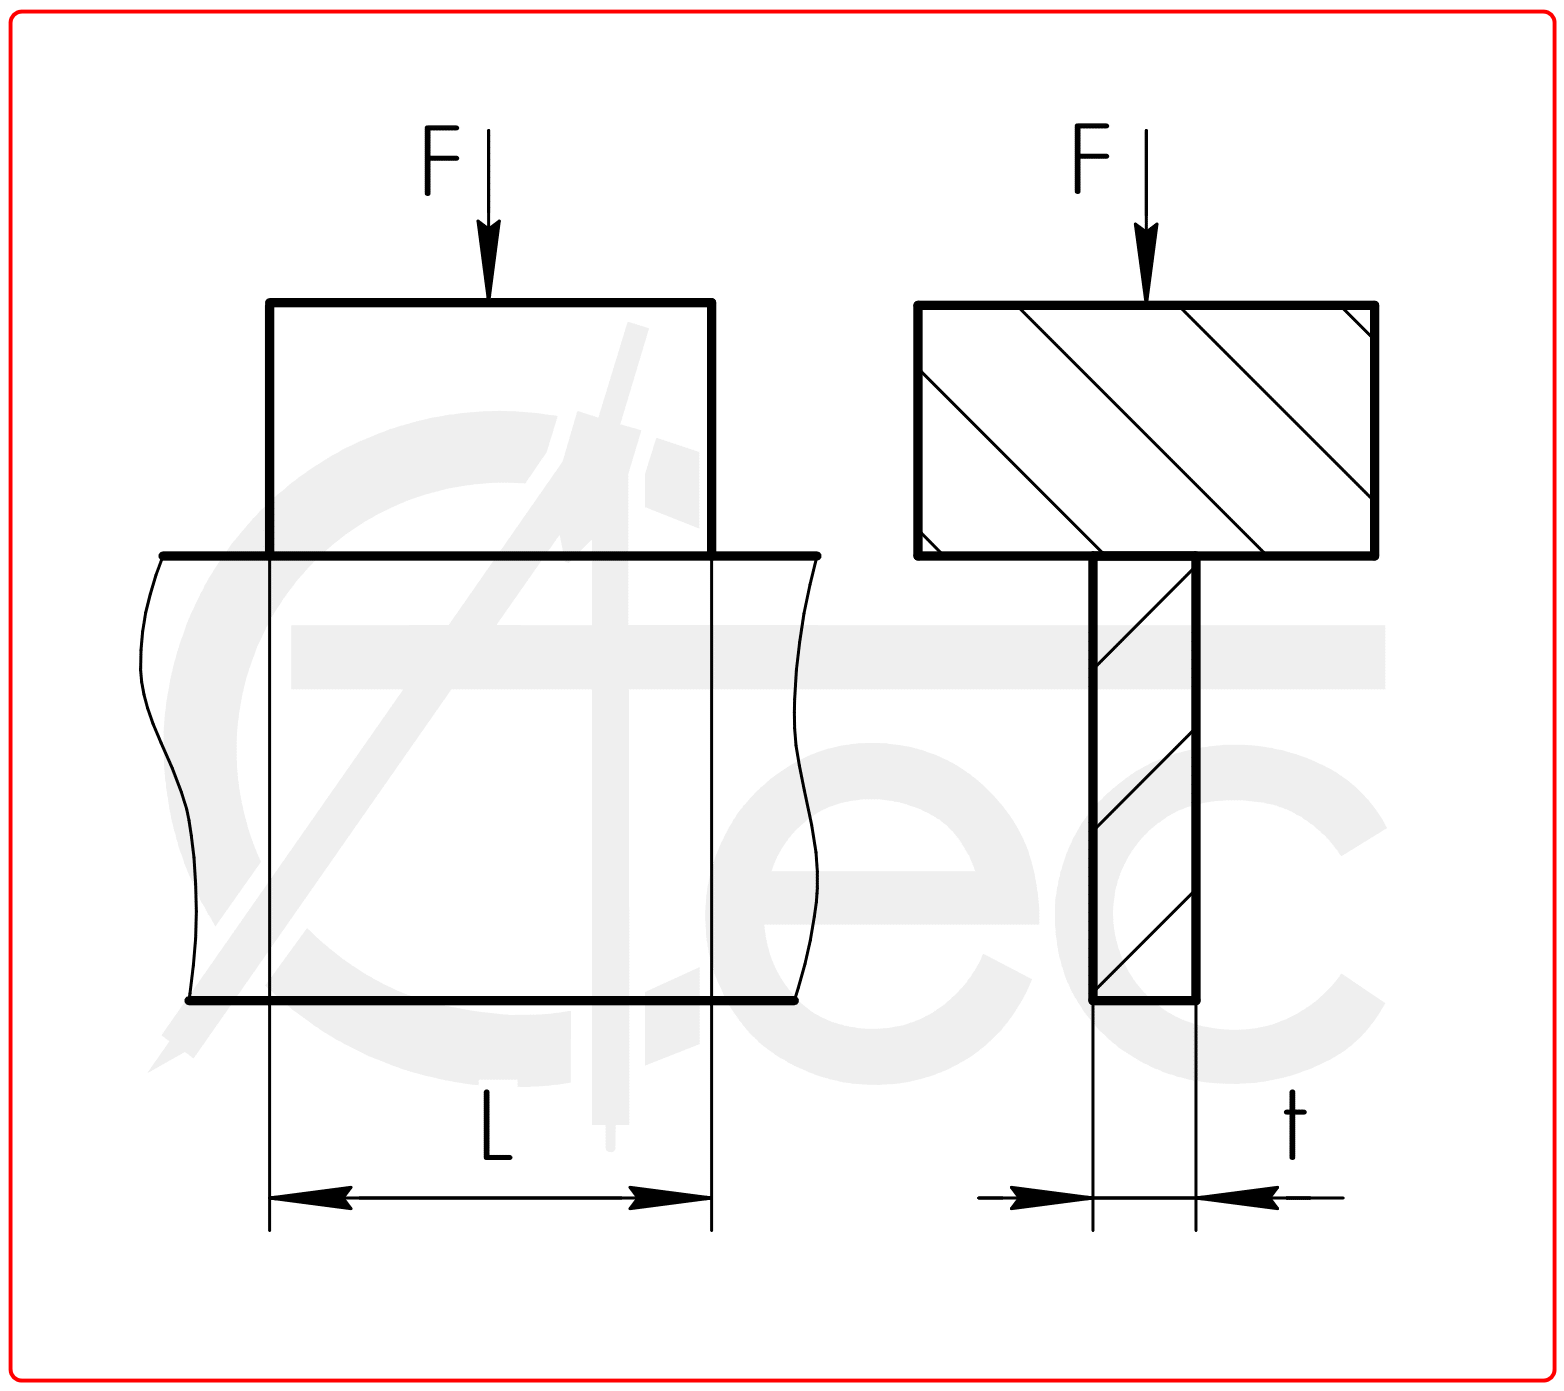 Calculation of Rigid block and plate edge contact